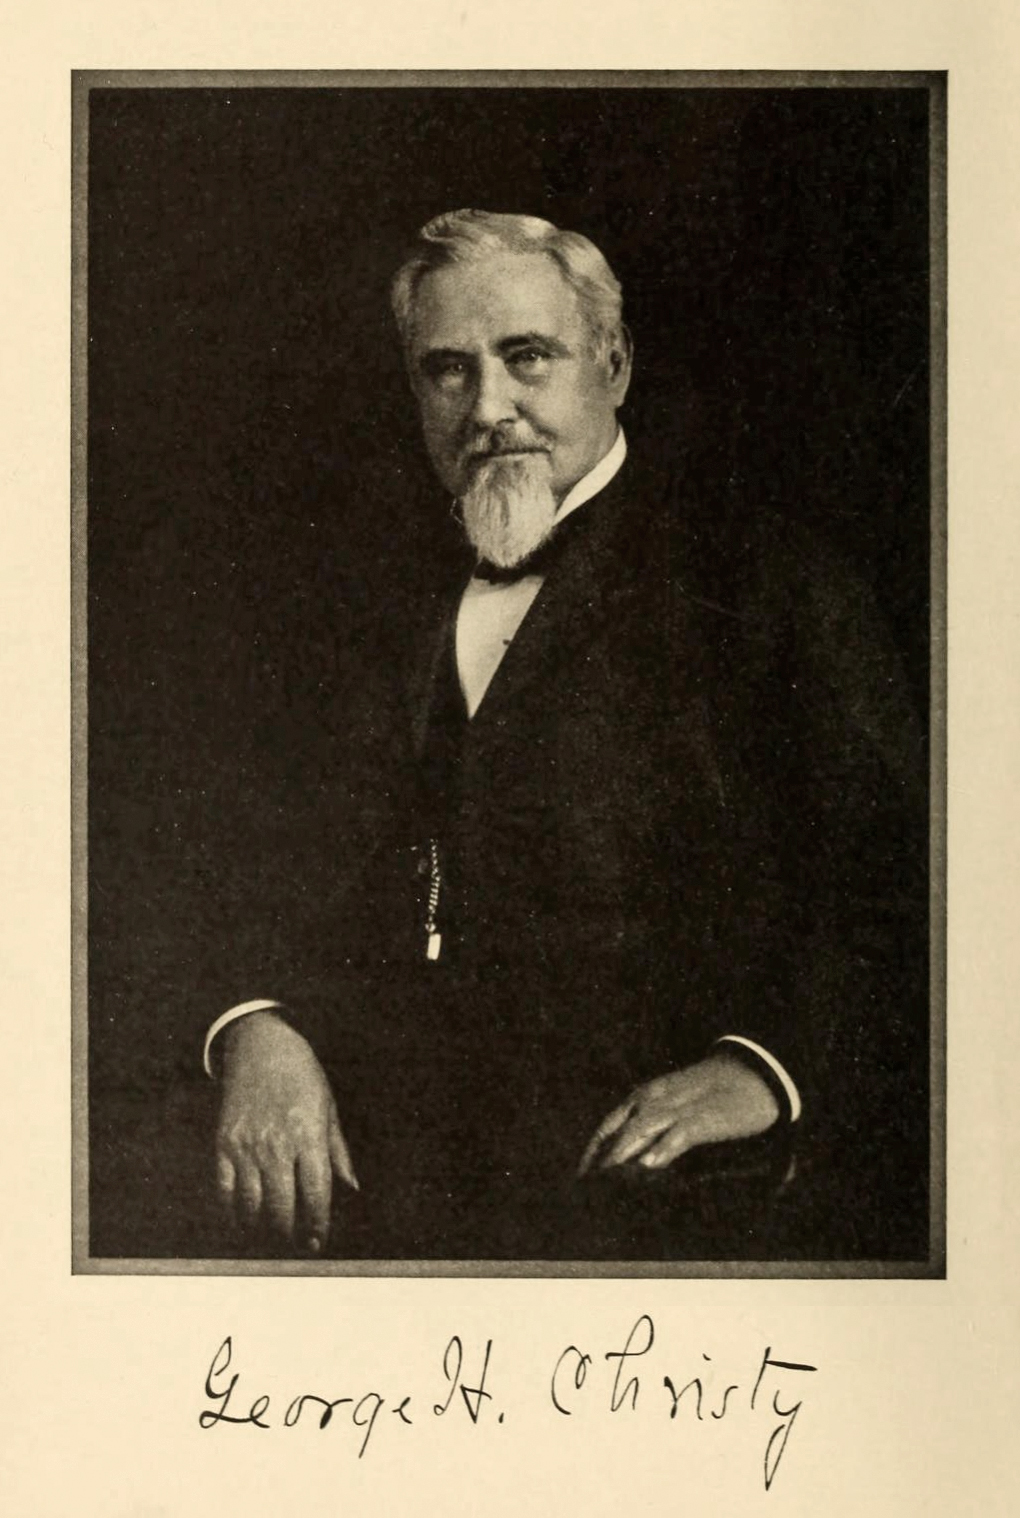 Photograph of George H. Christy.